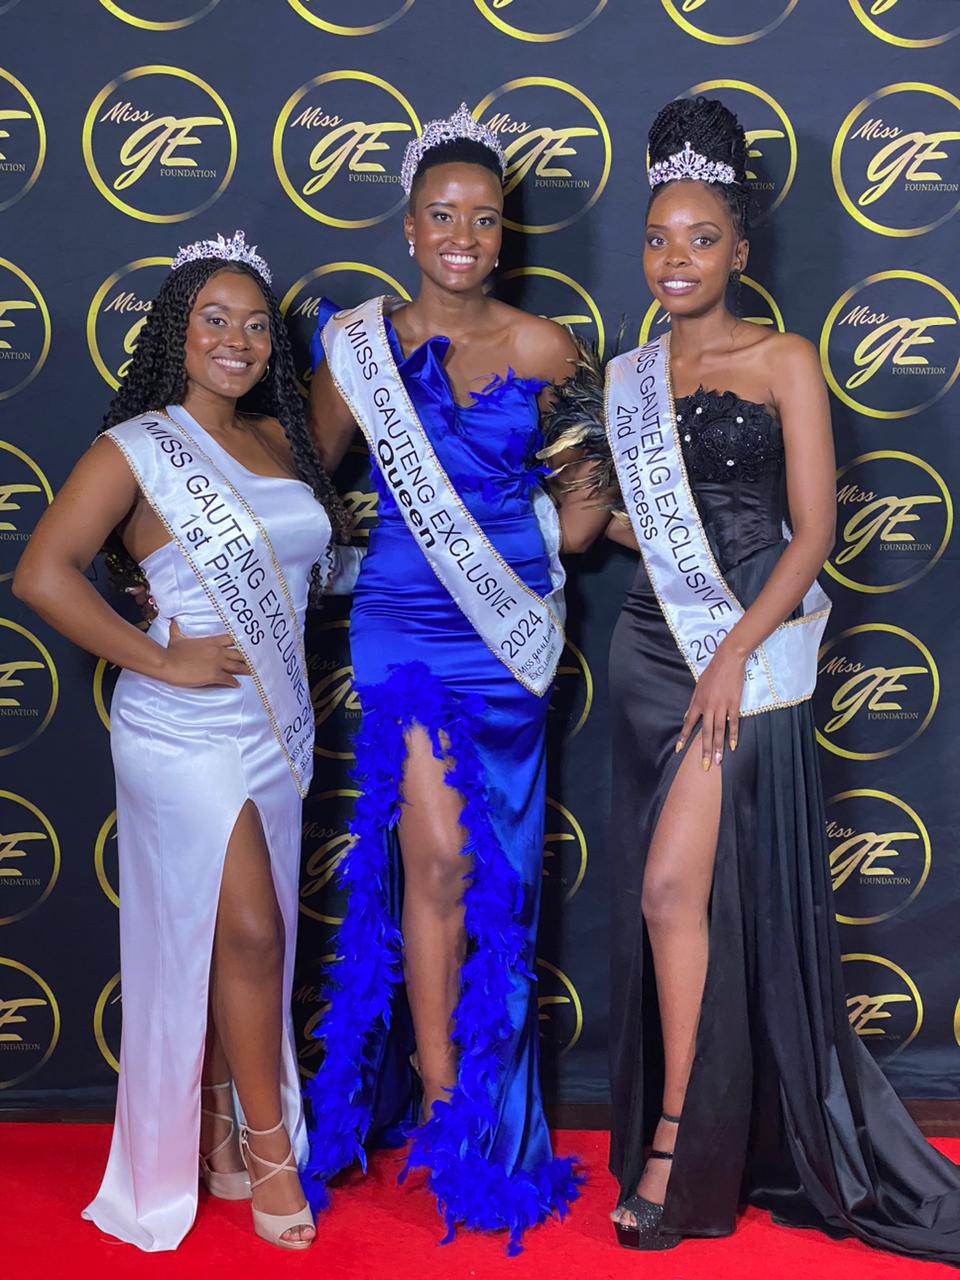 Newly crowned Queens of Miss Gauteng Exclusive celebrated